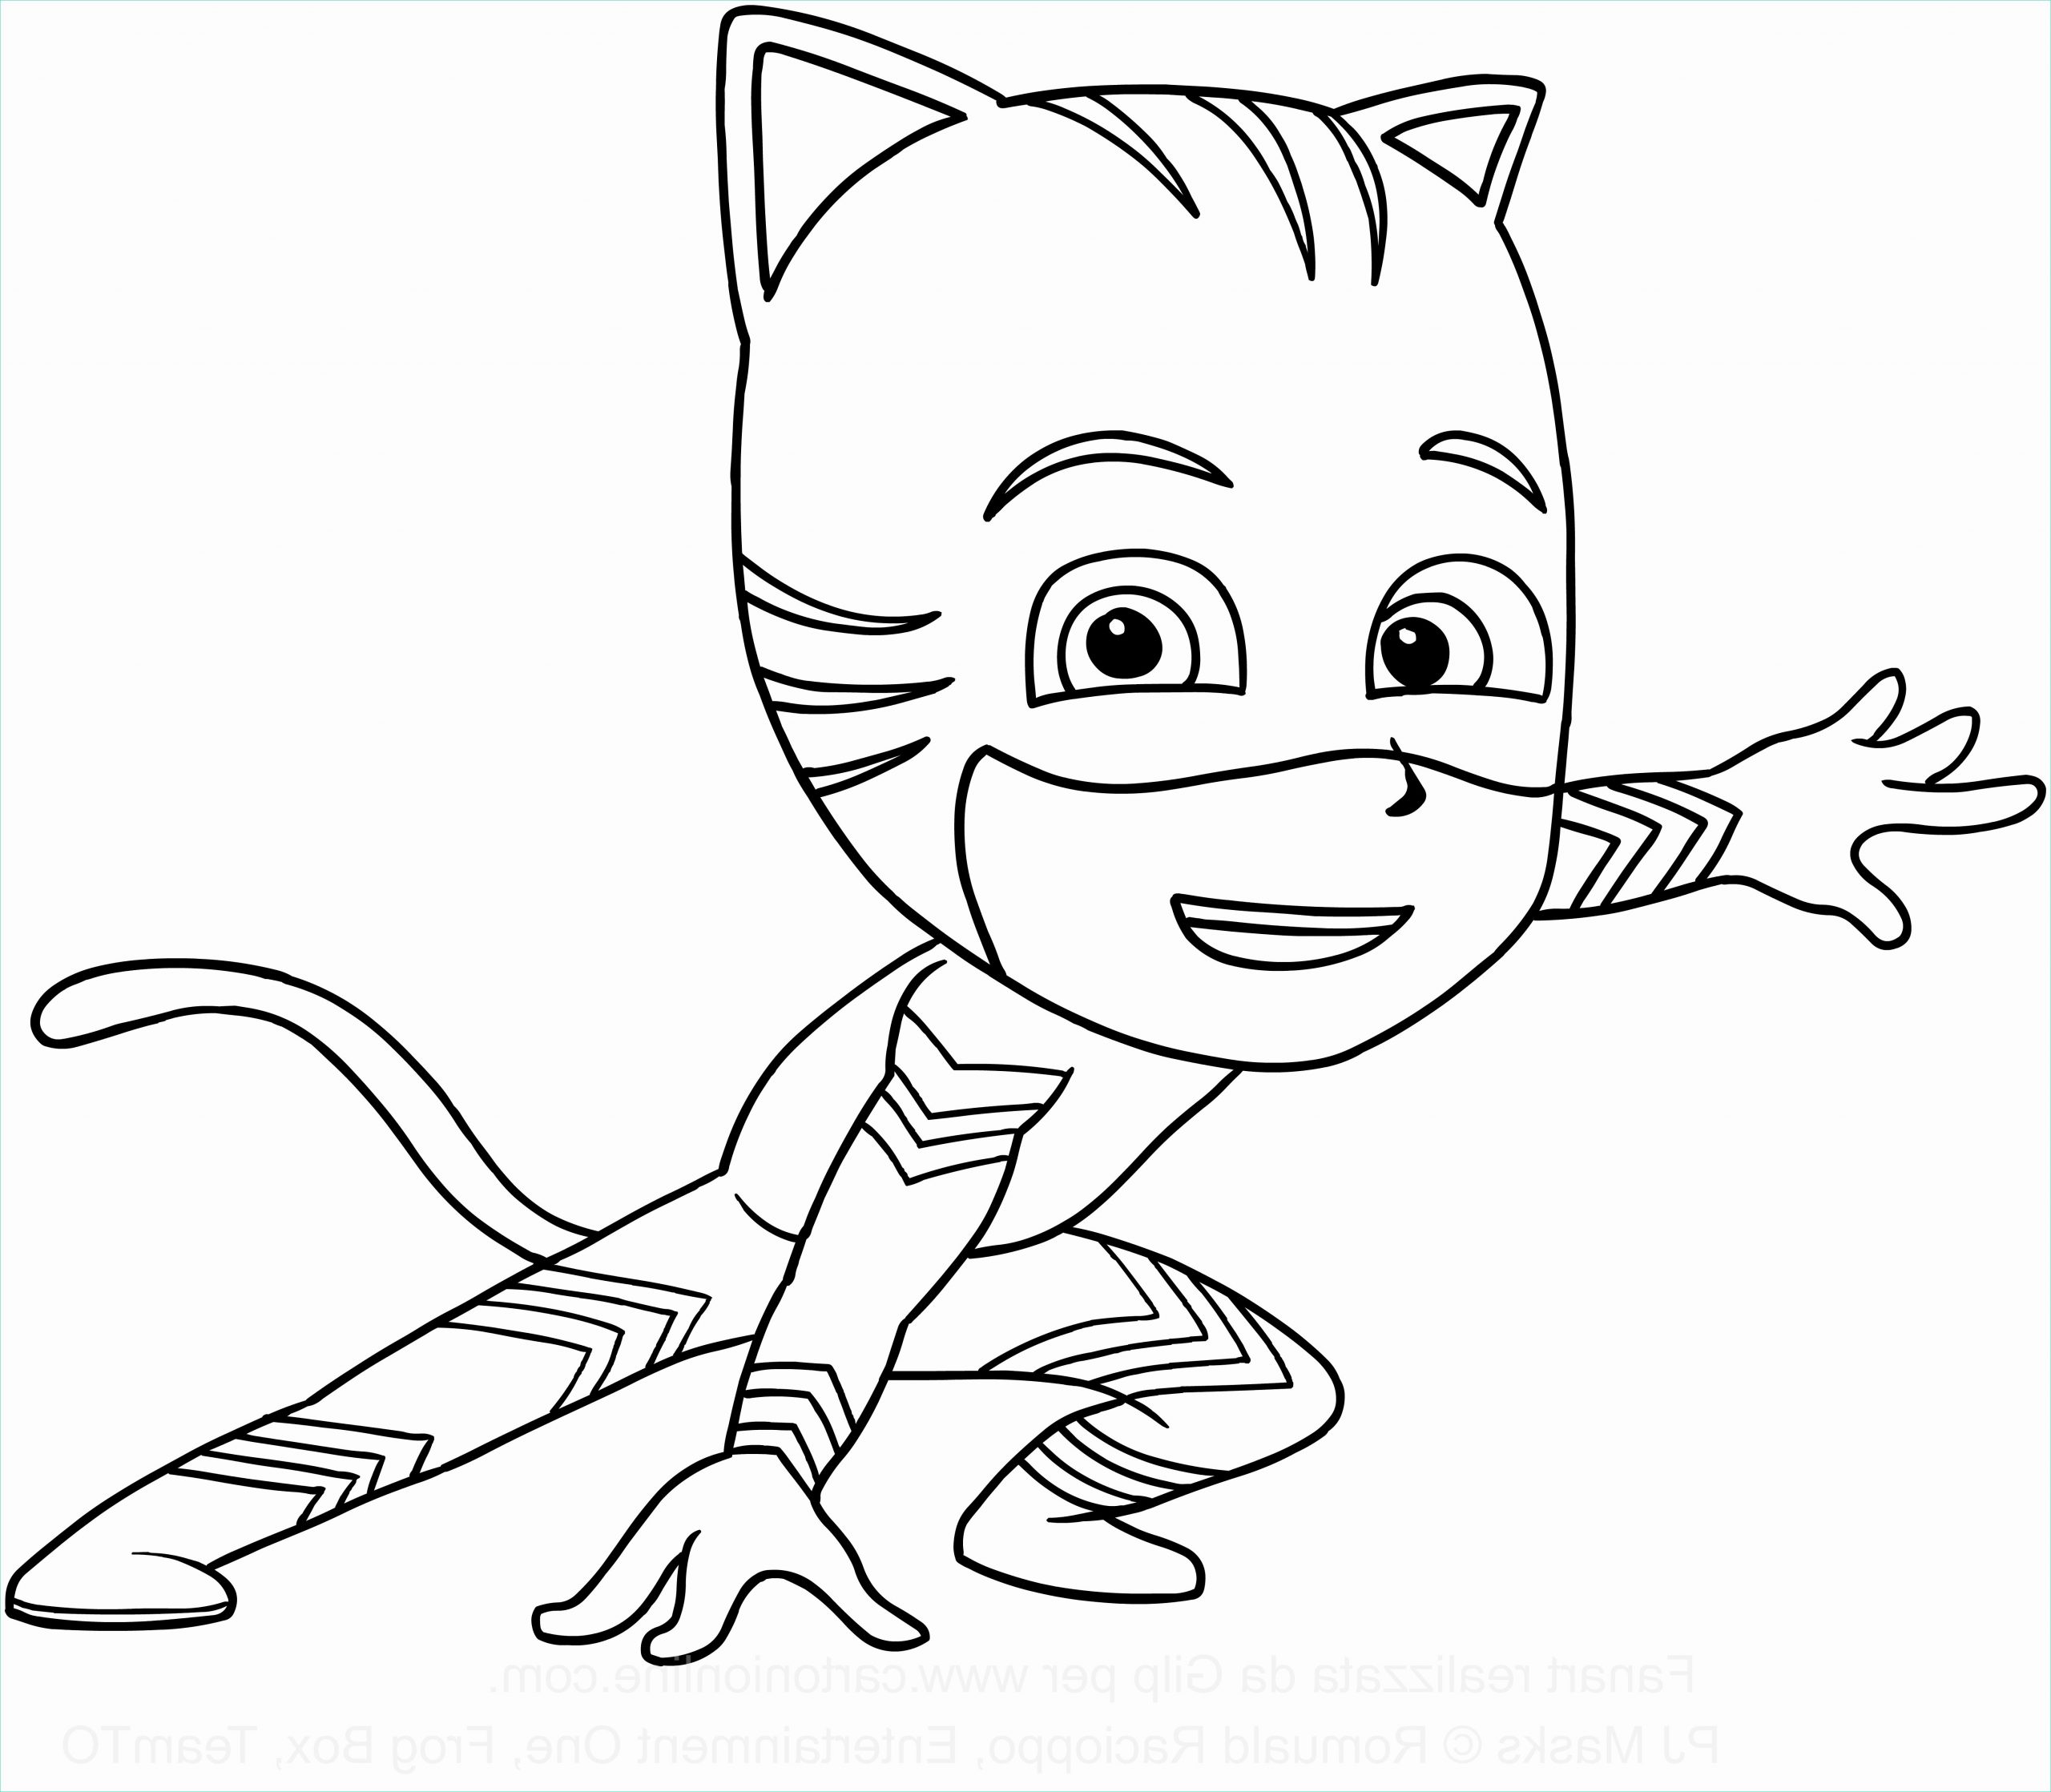 coloring pages of pj masks